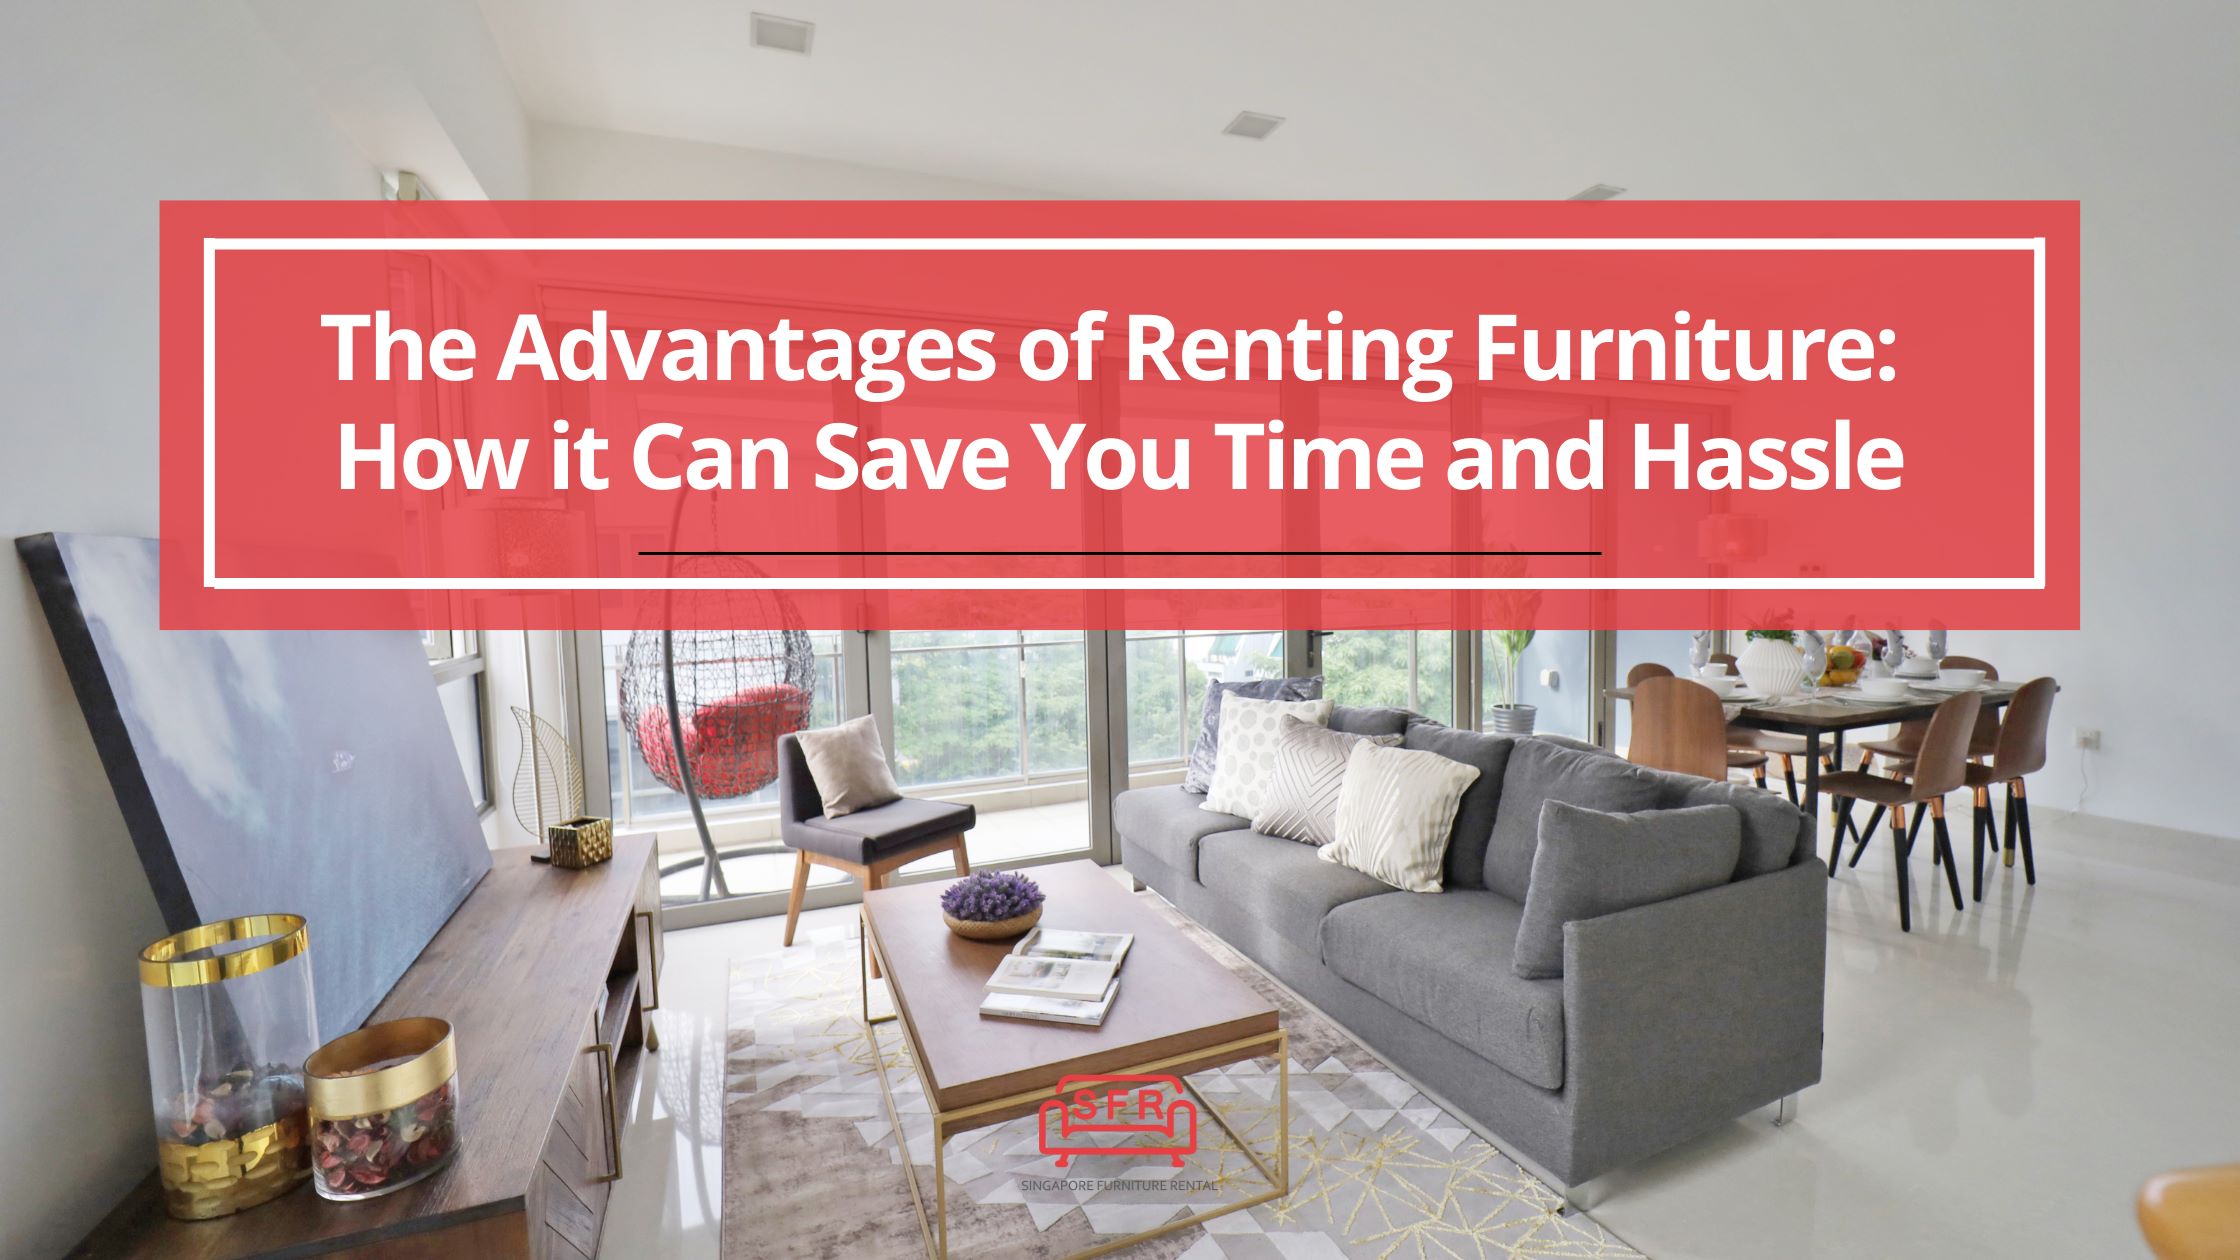 The Advantages of Renting Furniture: How it Can Save You Time and Hassle